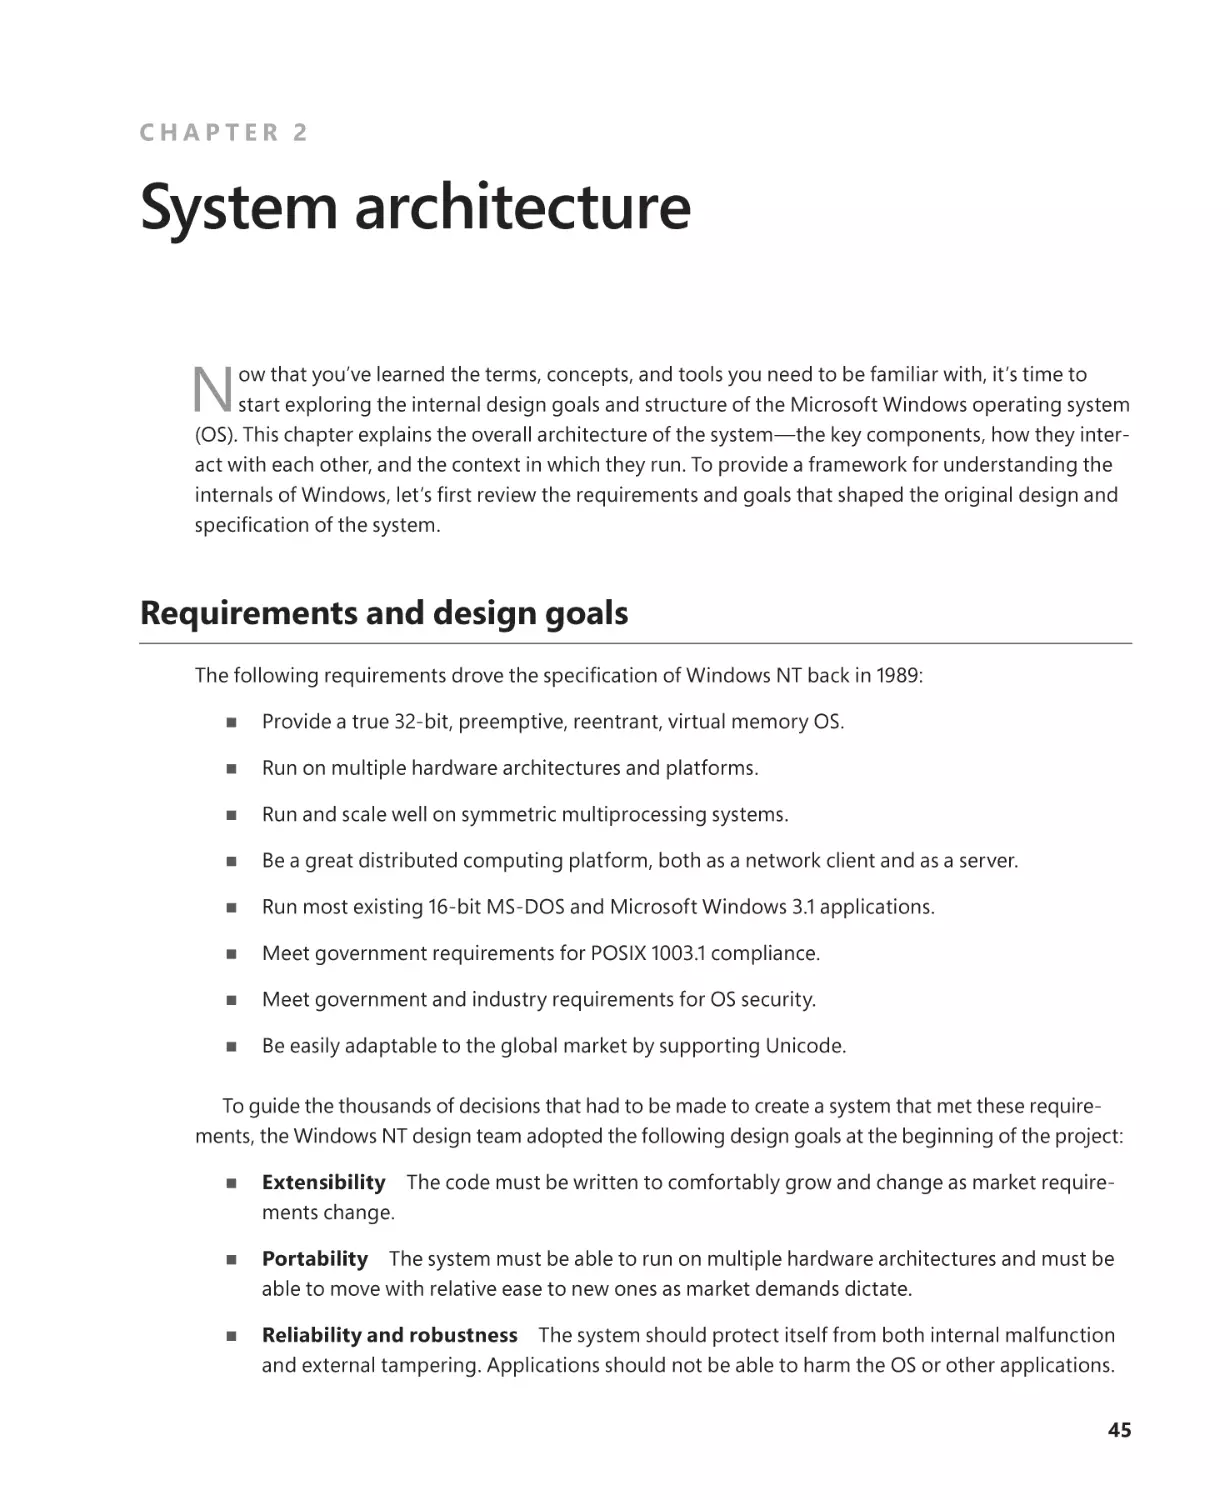 Chapter 2 System architecture
Requirements and design goals